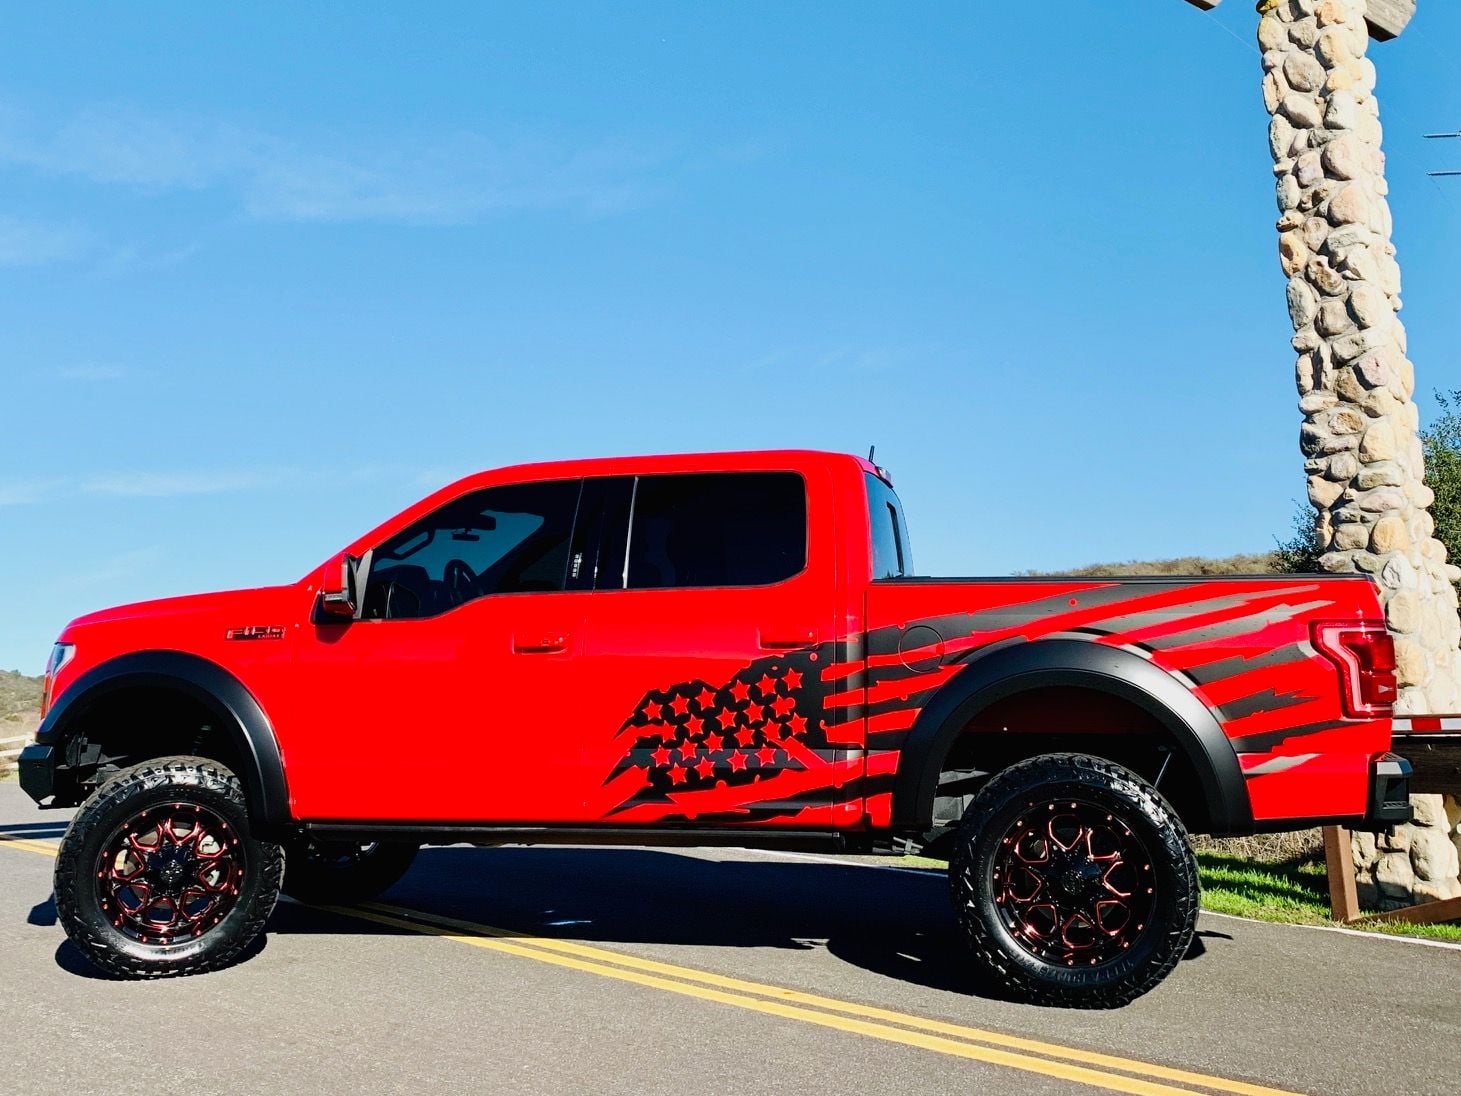 Ford F-150 Raptor: Add a Splash of Pink with Color Change Wrap